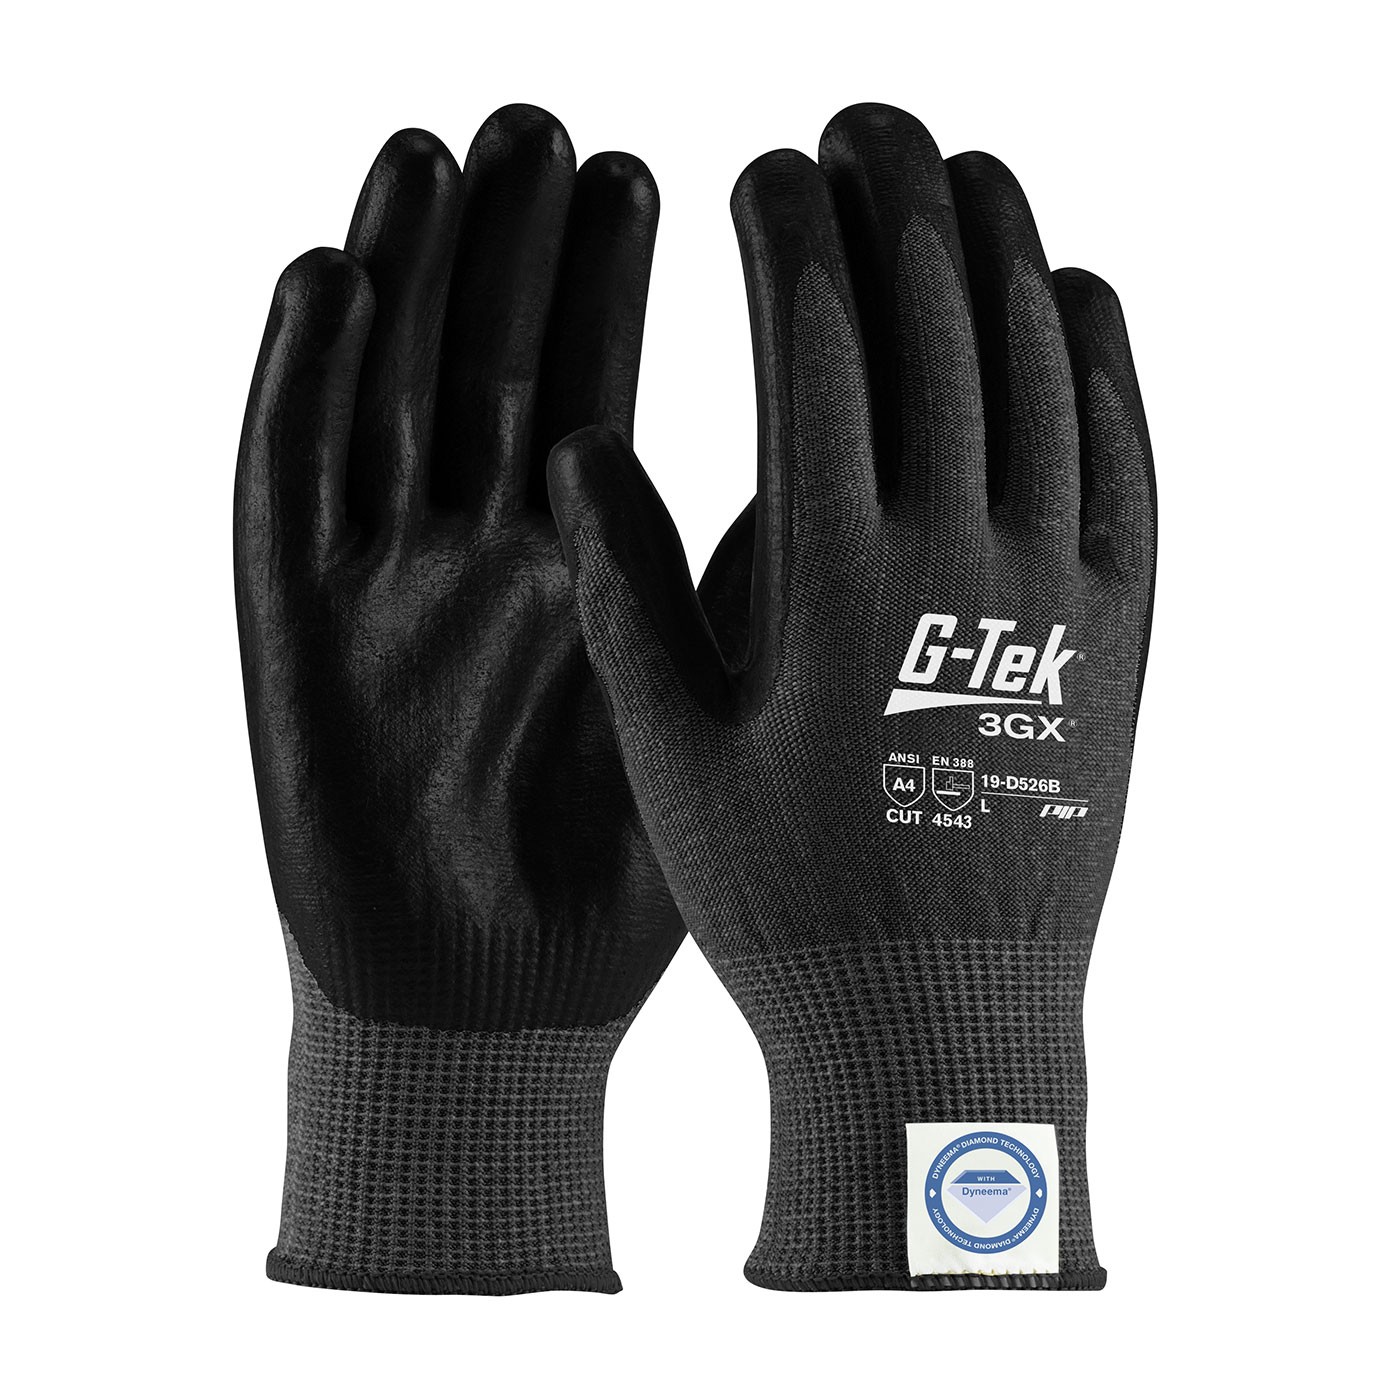 G-Tek® 3GX® Black Seamless Knit Dyneema® Diamond Blended Glove with Polyurethane Coated Smooth Grip on Palm & Fingers - Touchscreen Compatible  (#19-D526B)